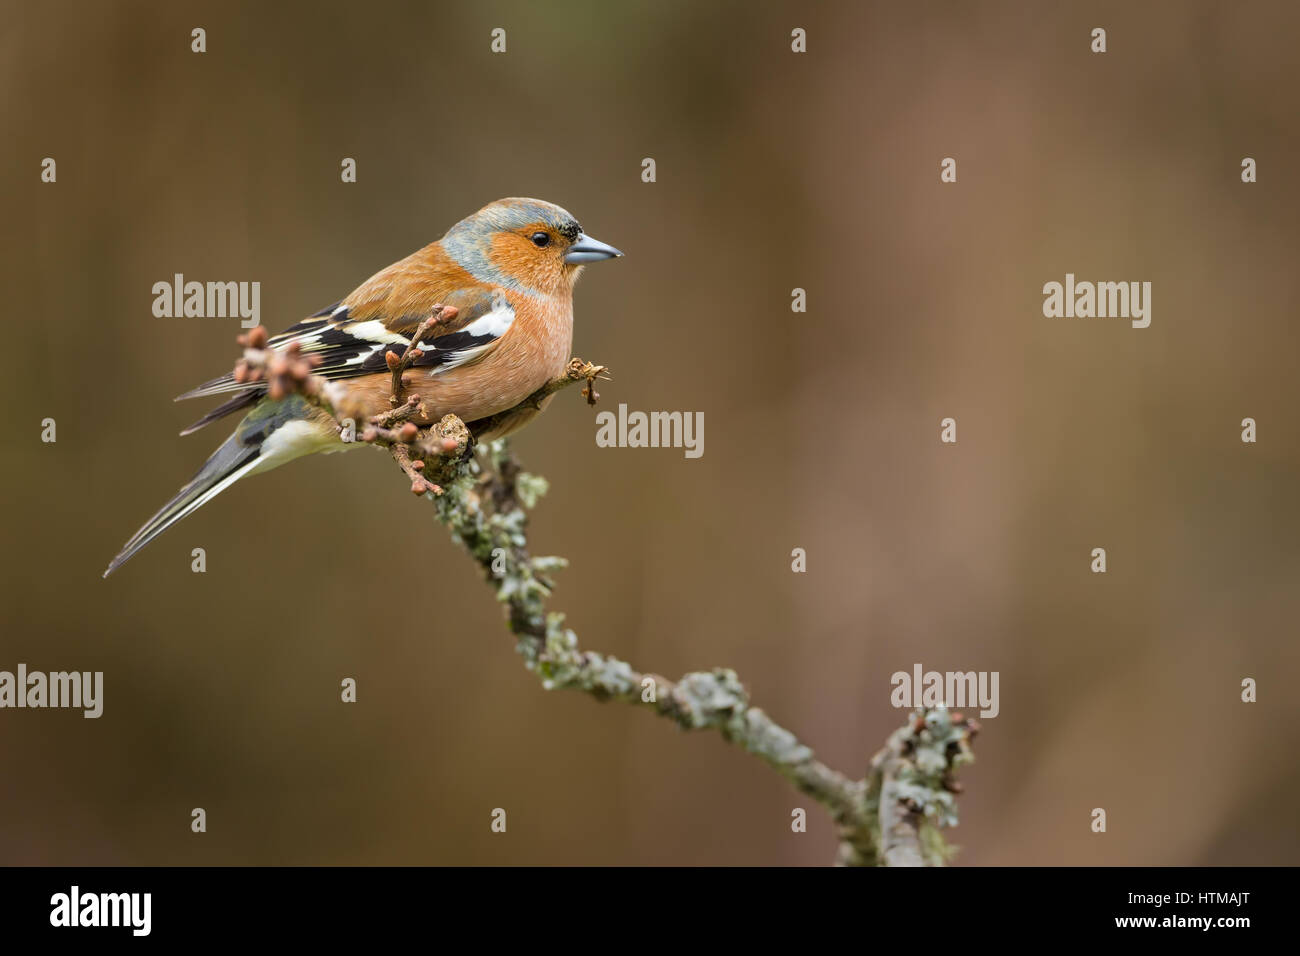 A male Chaffinch on the left looking right perched on a lichen covered branch Stock Photo